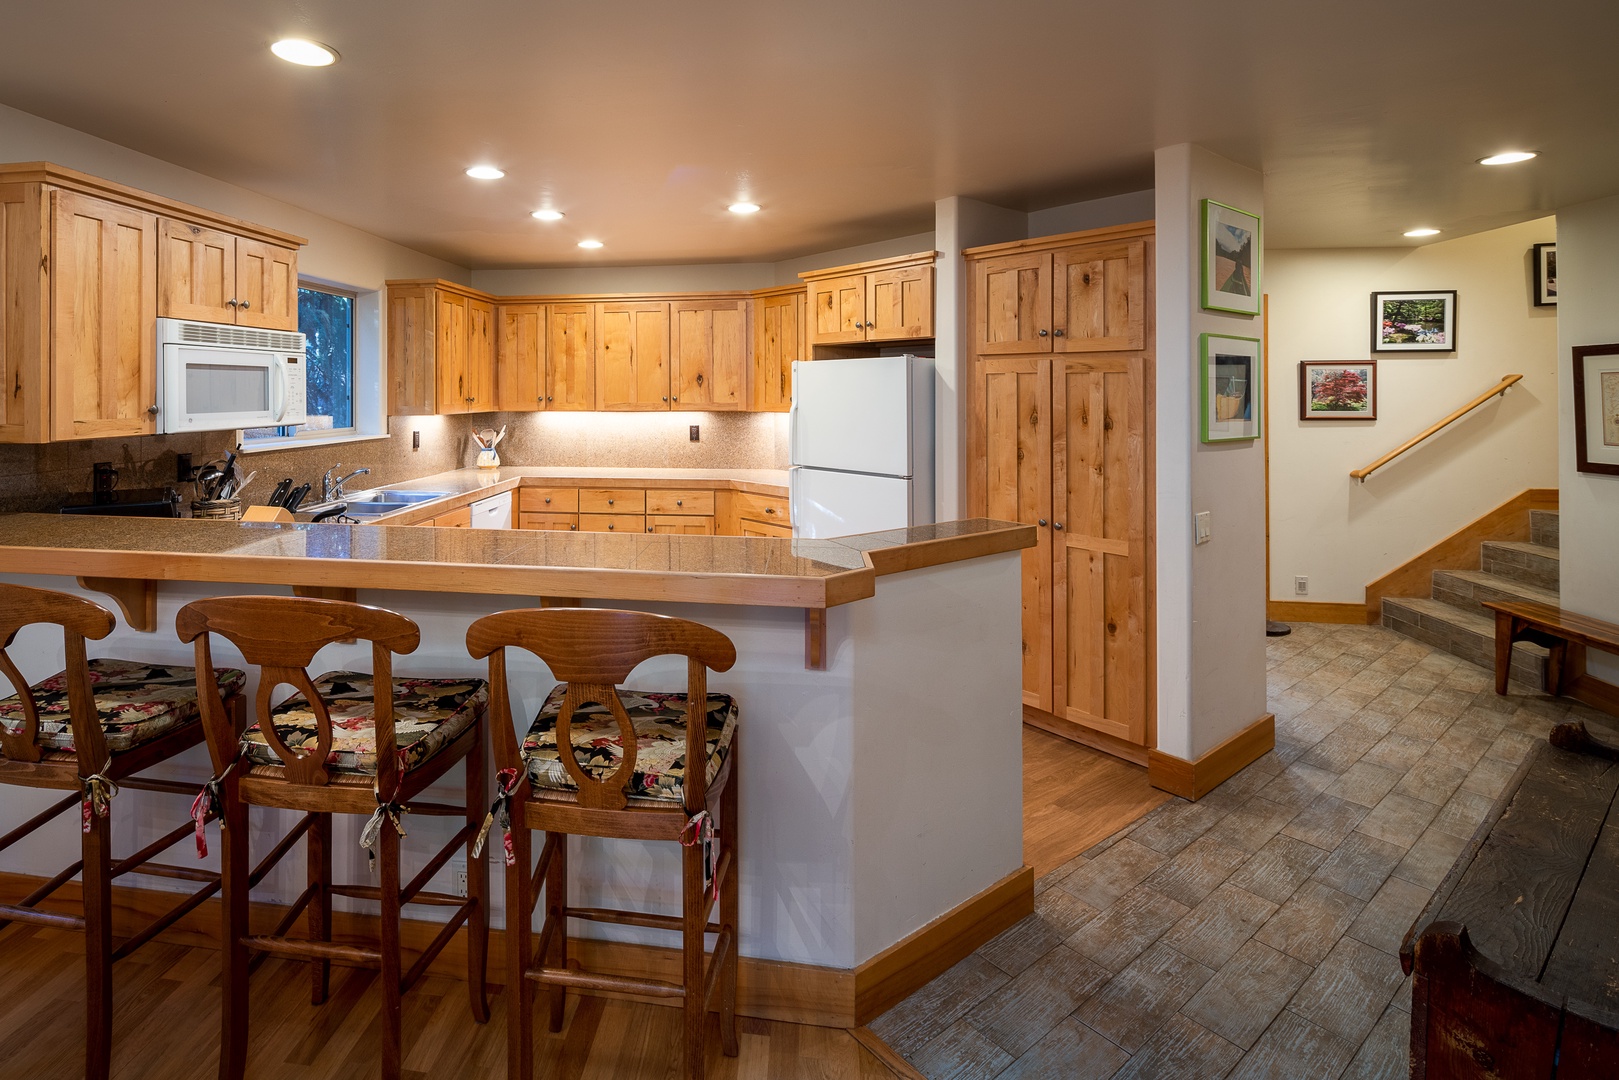 Ketchum Vacation Rentals, Bridgepoint Charm - Keep the chef company at the breakfast bar